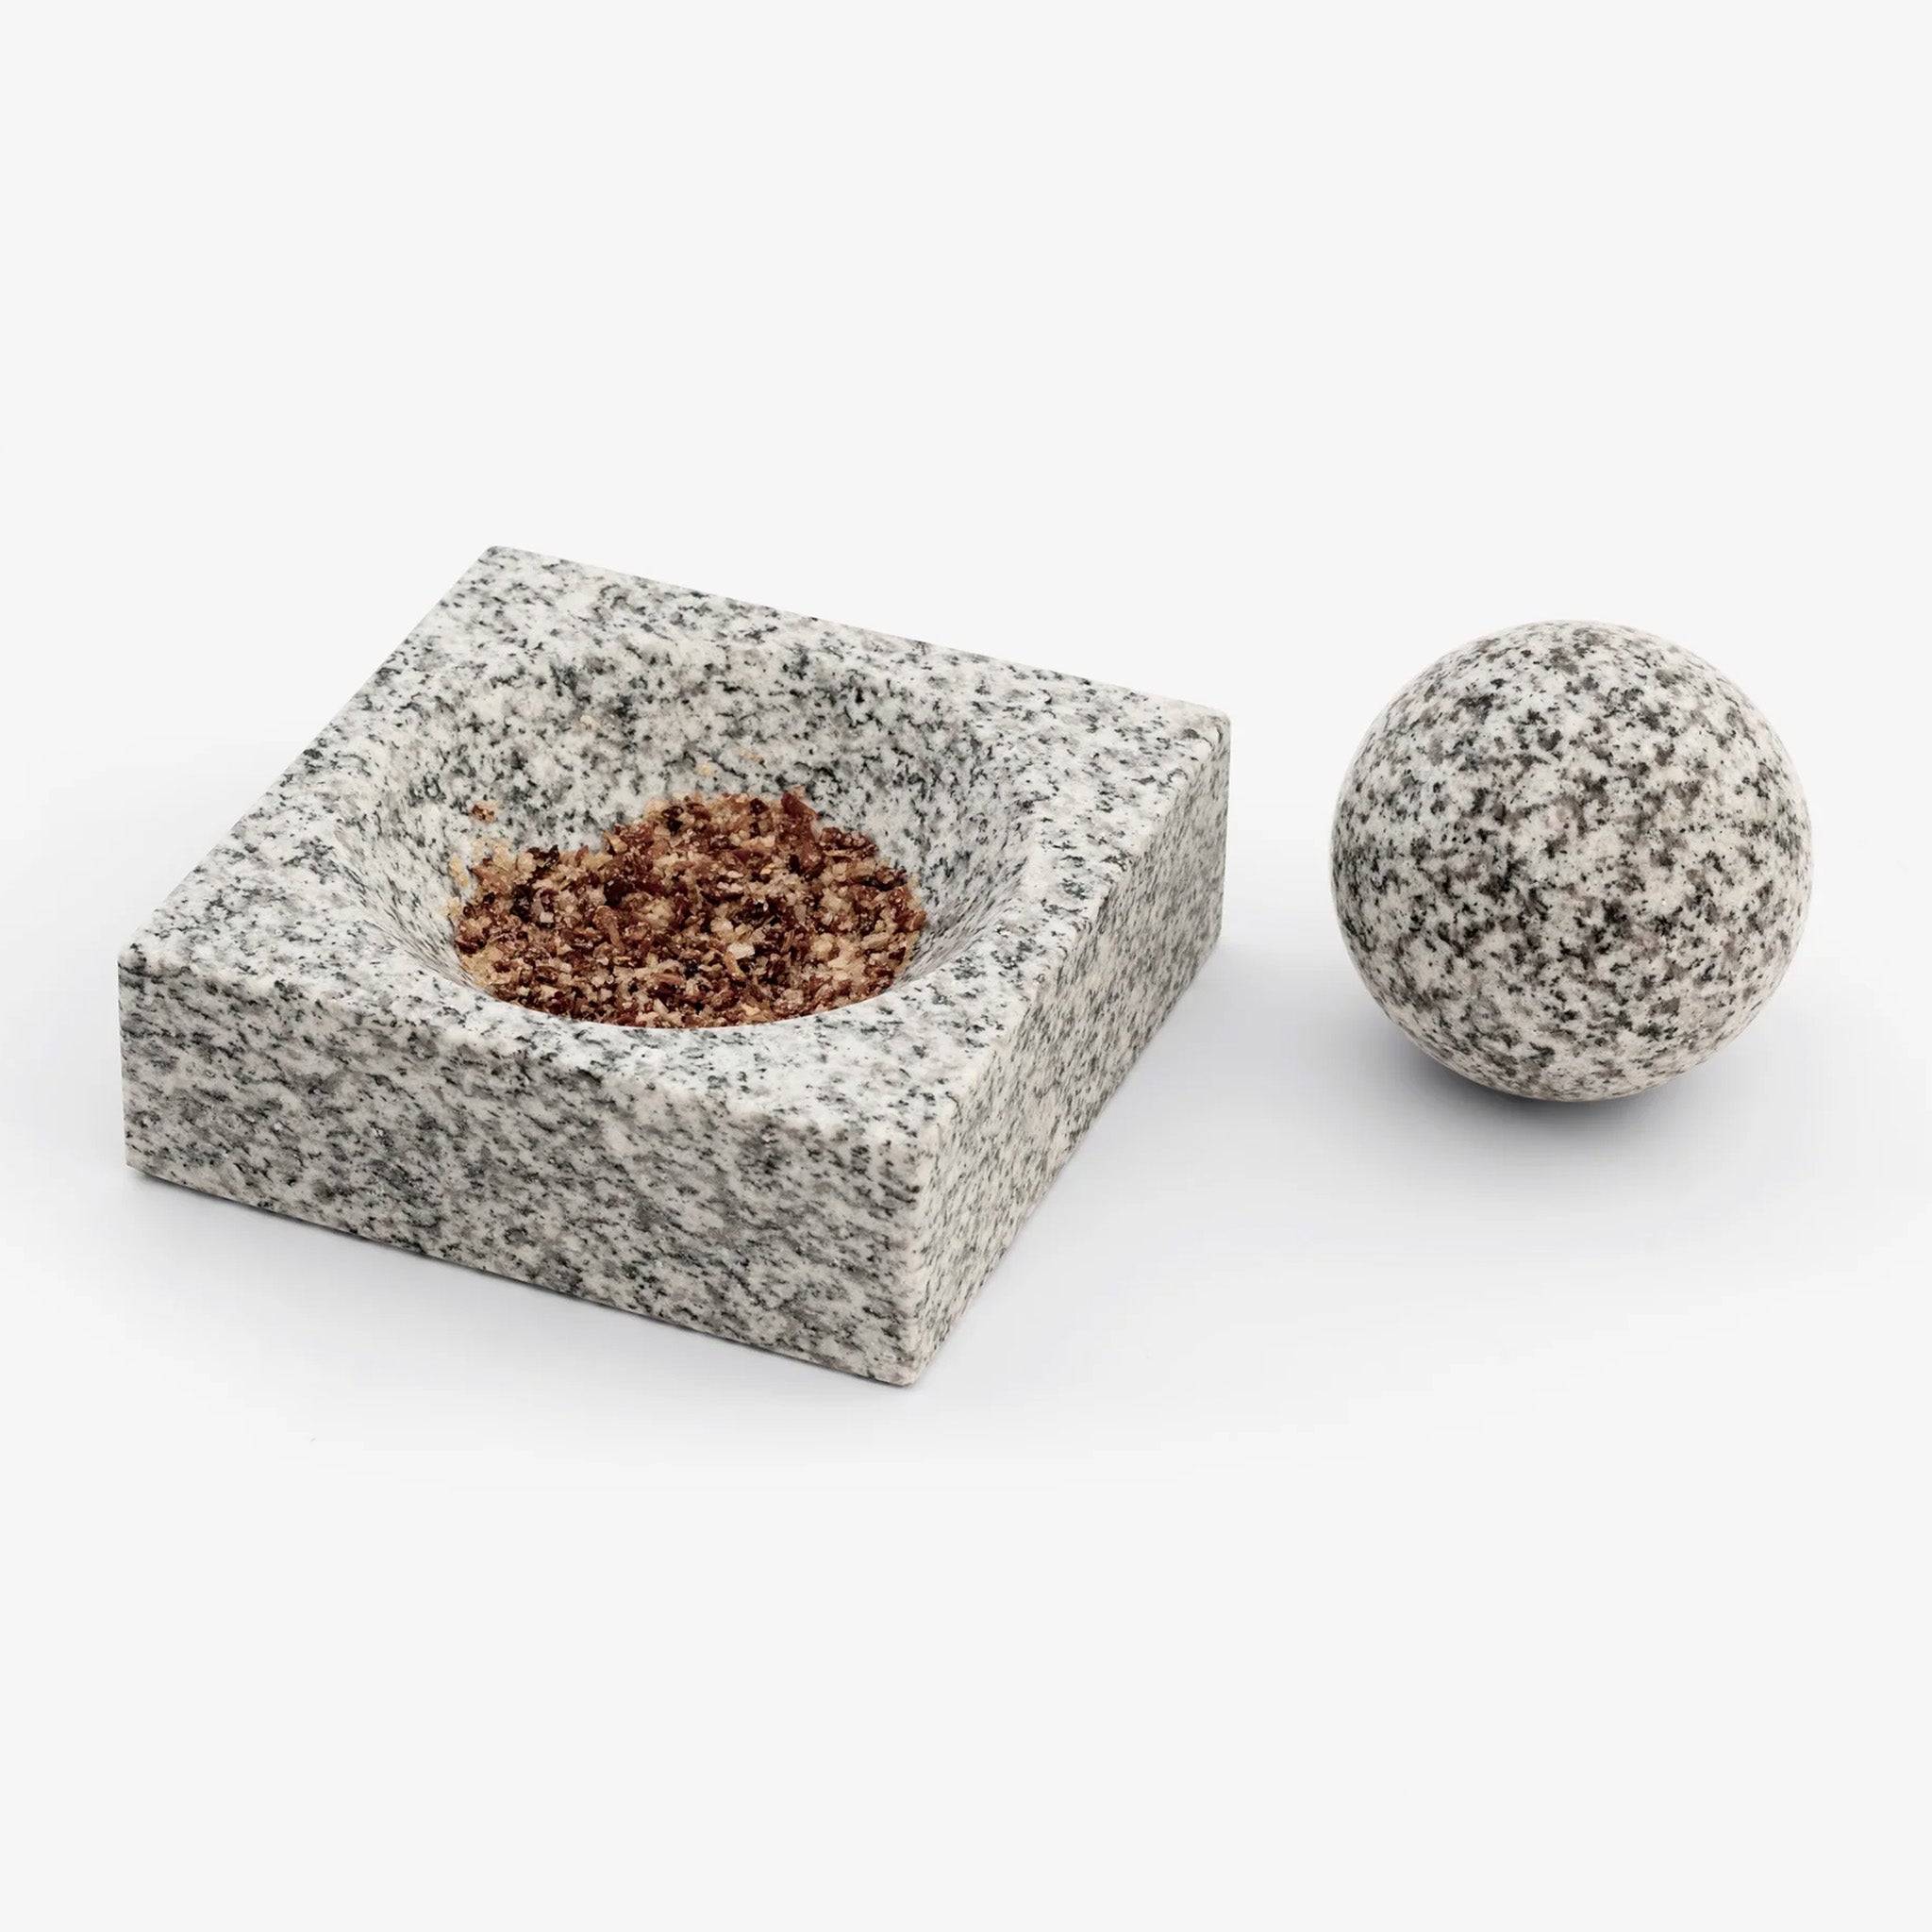 Orb Pestle & Mortar by Case